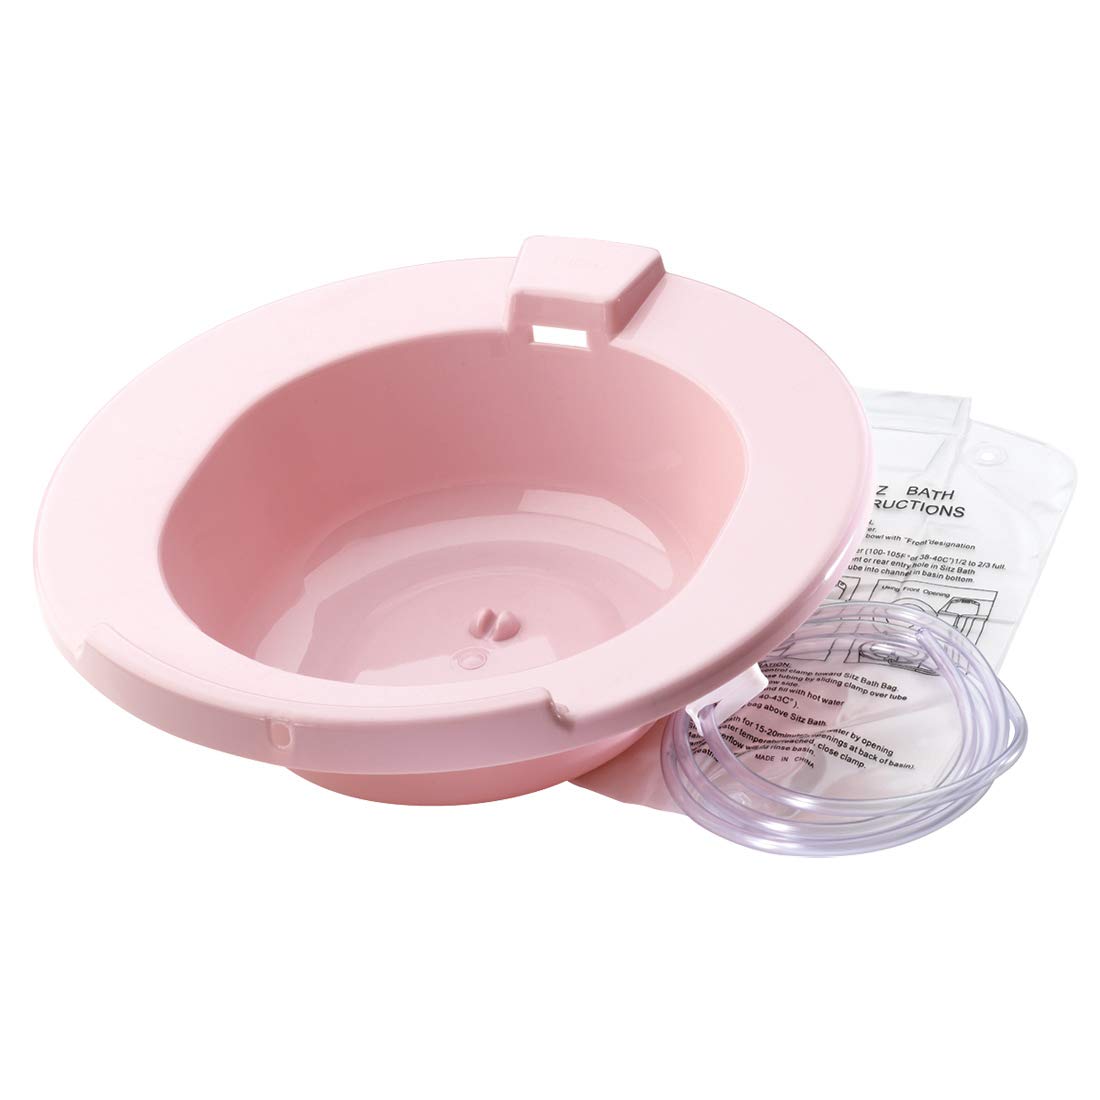 Carex Sitz Bath, Over-the-Toilet Perineal Soaking Bath, for Hemorrhoidal Relief, Ideal for Post-Episiotomy Patients